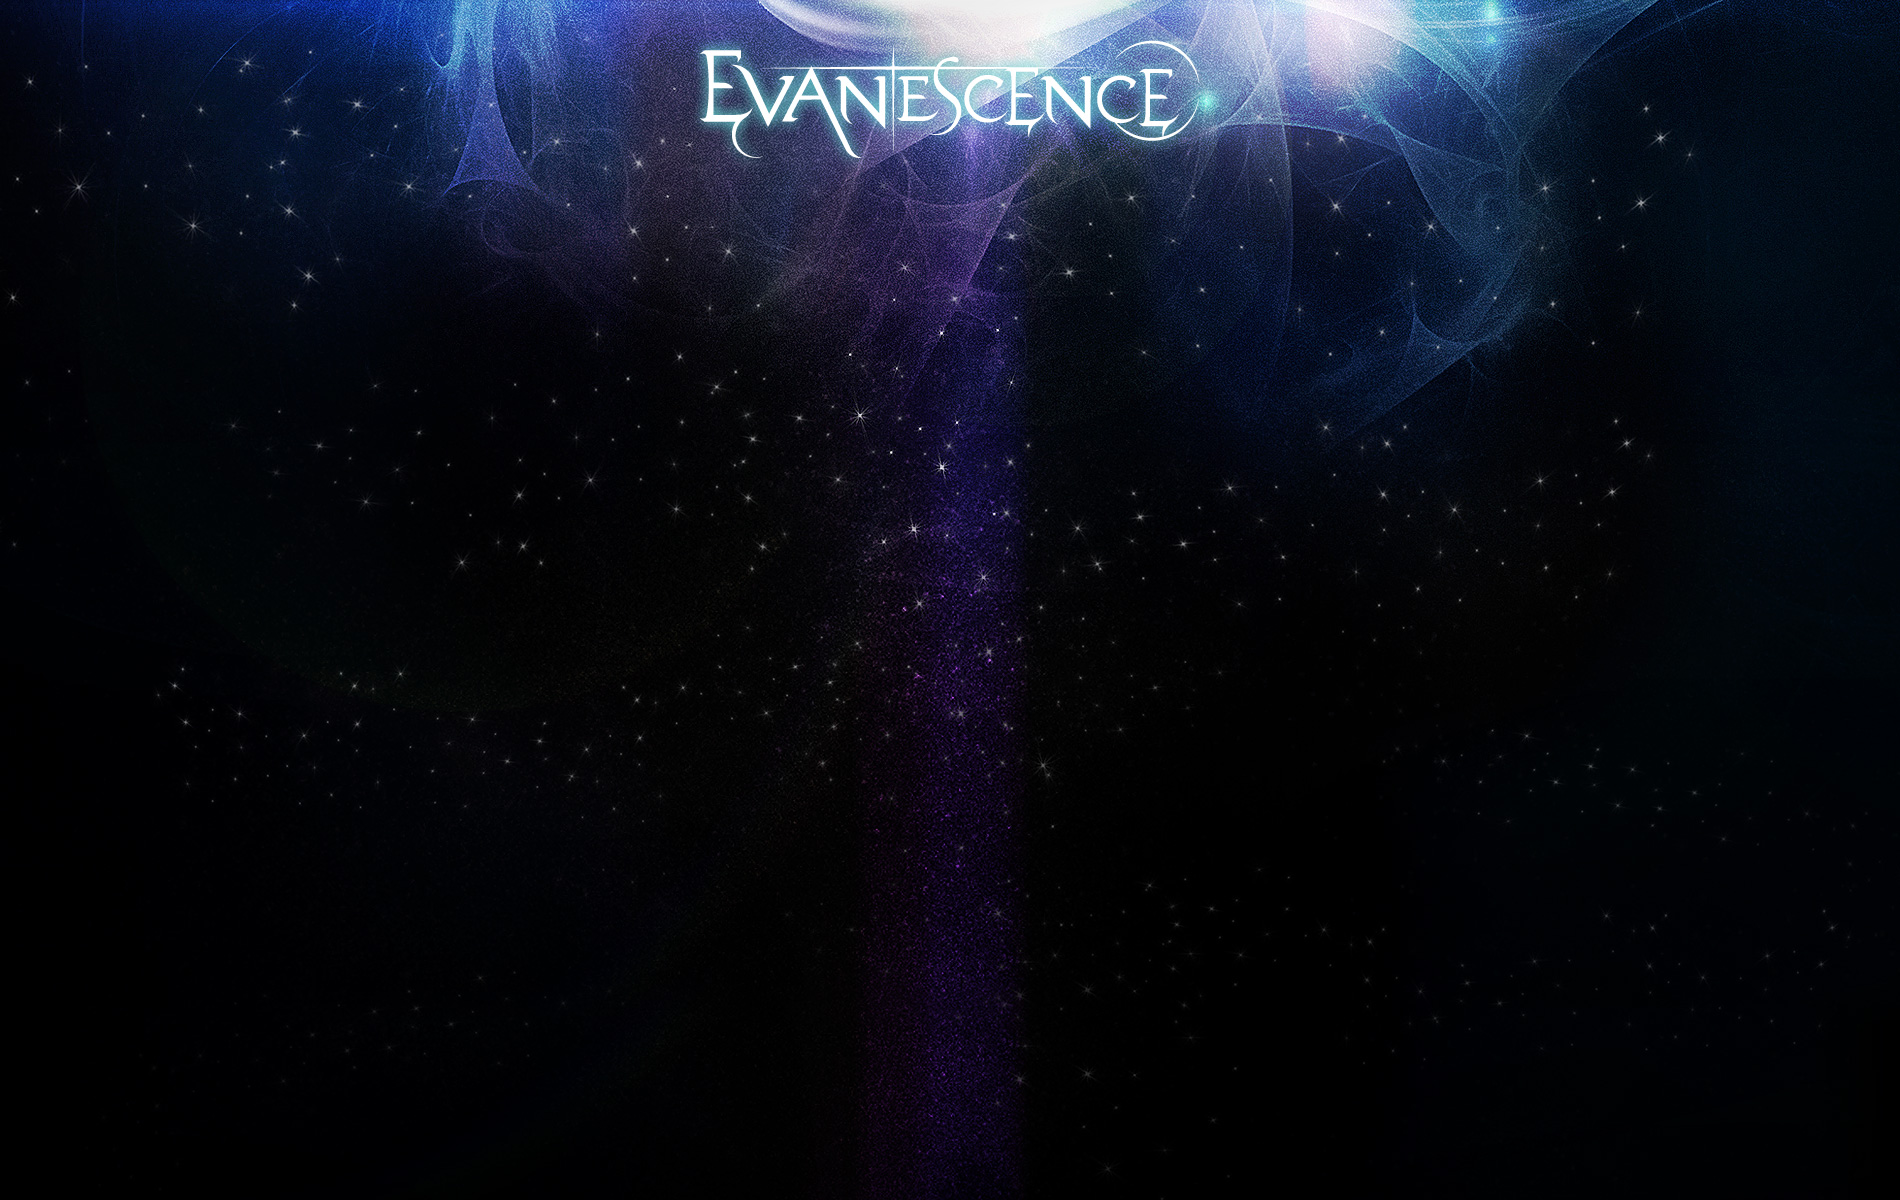 Evanescence Image Cool HD Wallpaper And